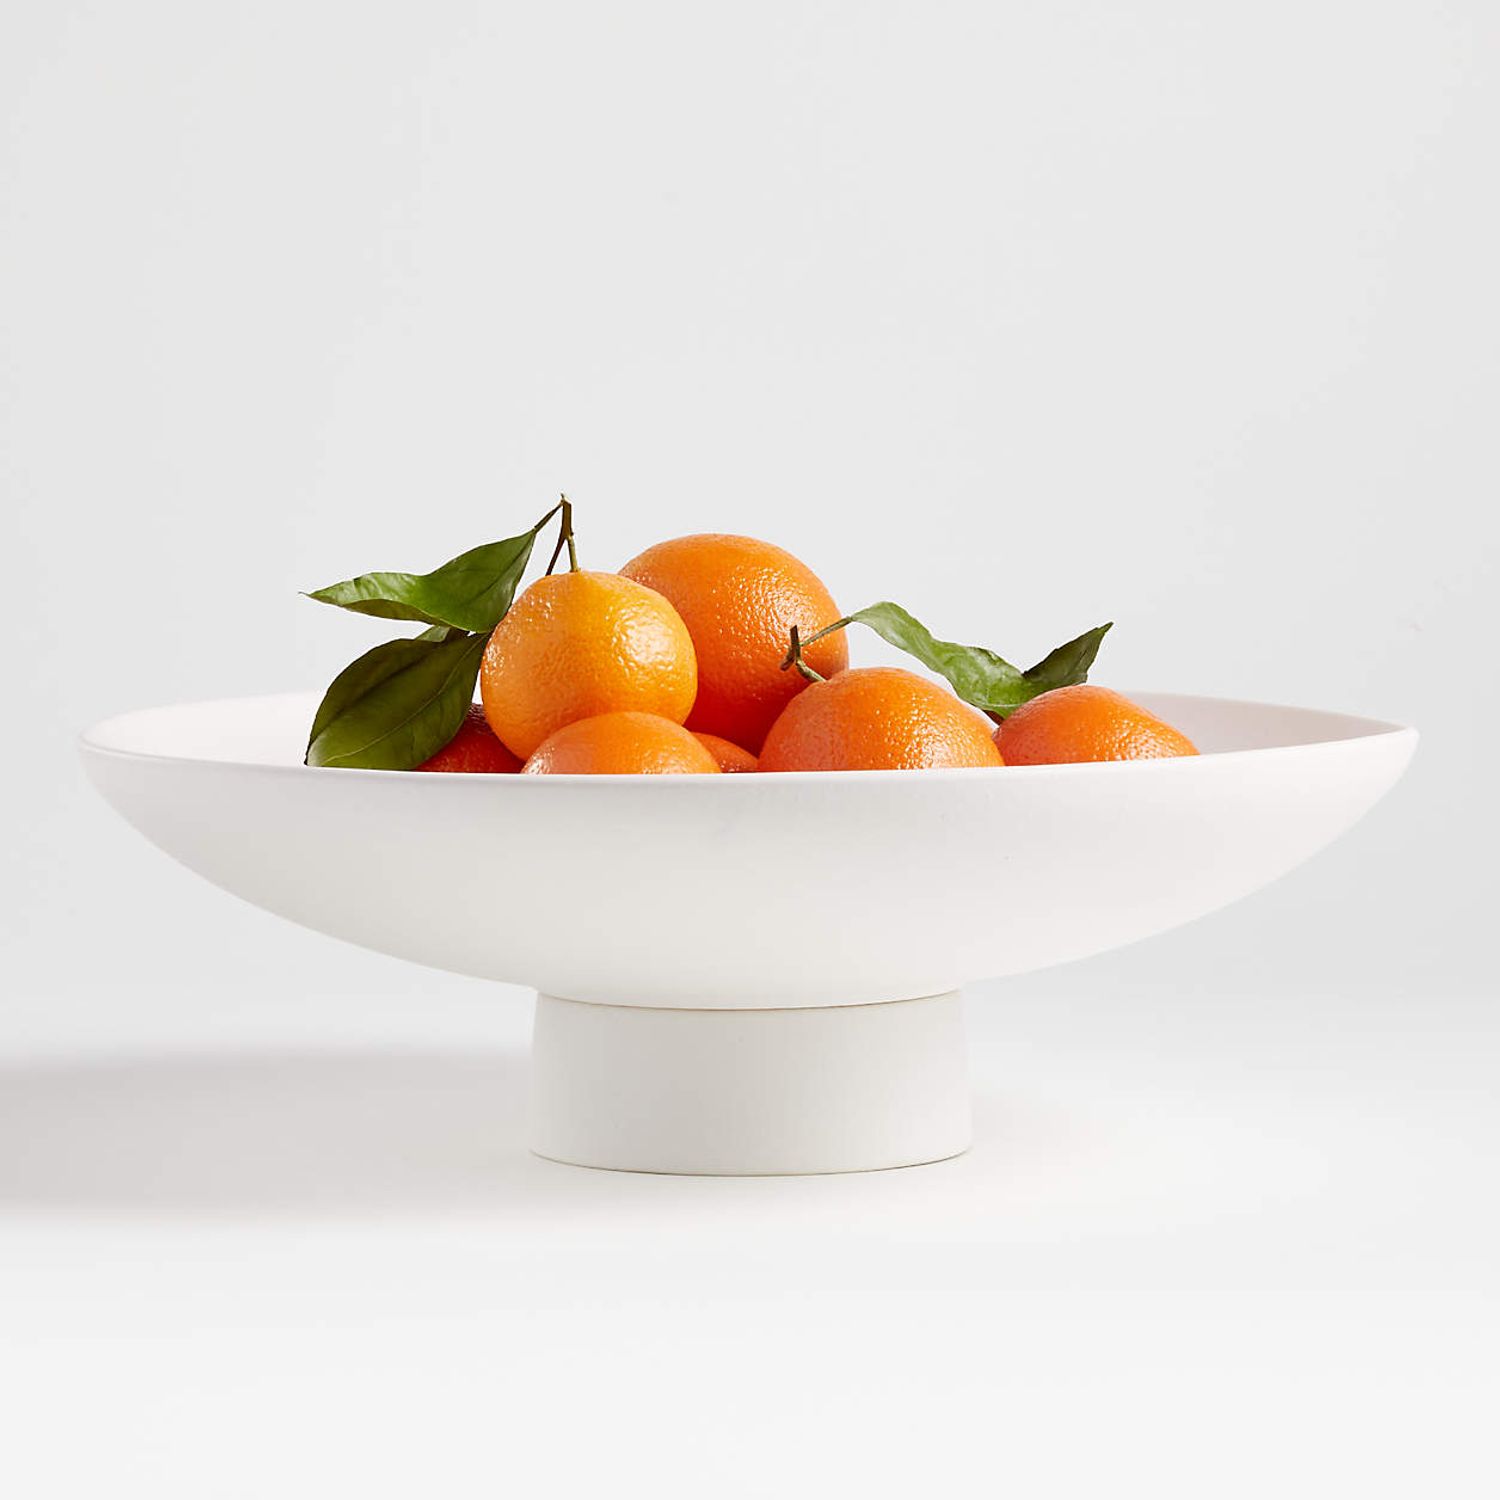 Shop Footed Bowl  from Crate and Barrel on Openhaus